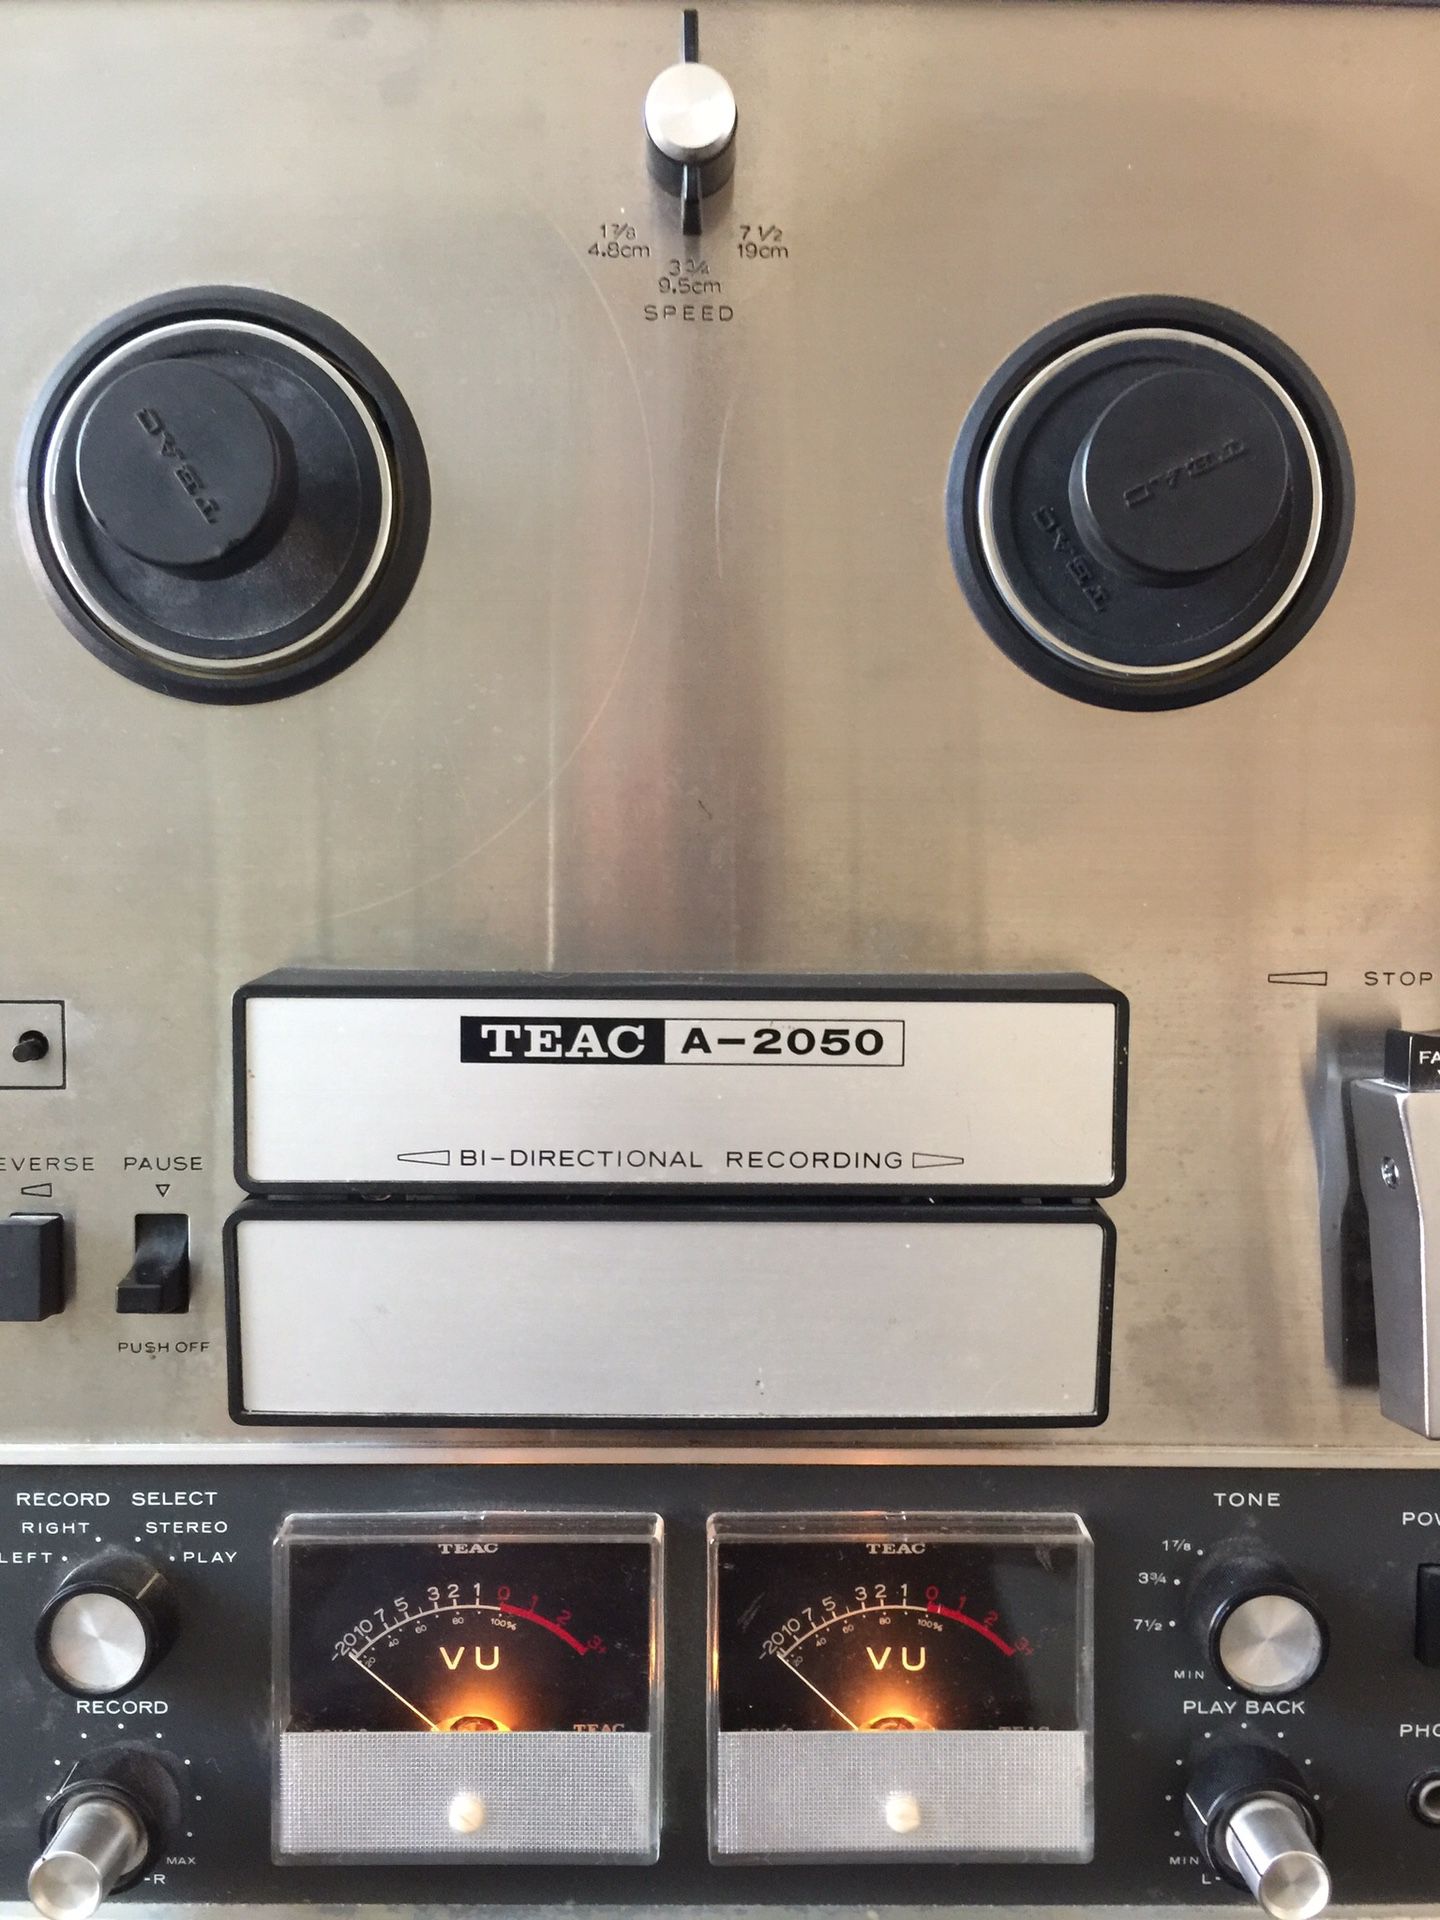 Reel-to-reel Tape Player — Roberts 770x for Sale in West Linn, OR - OfferUp